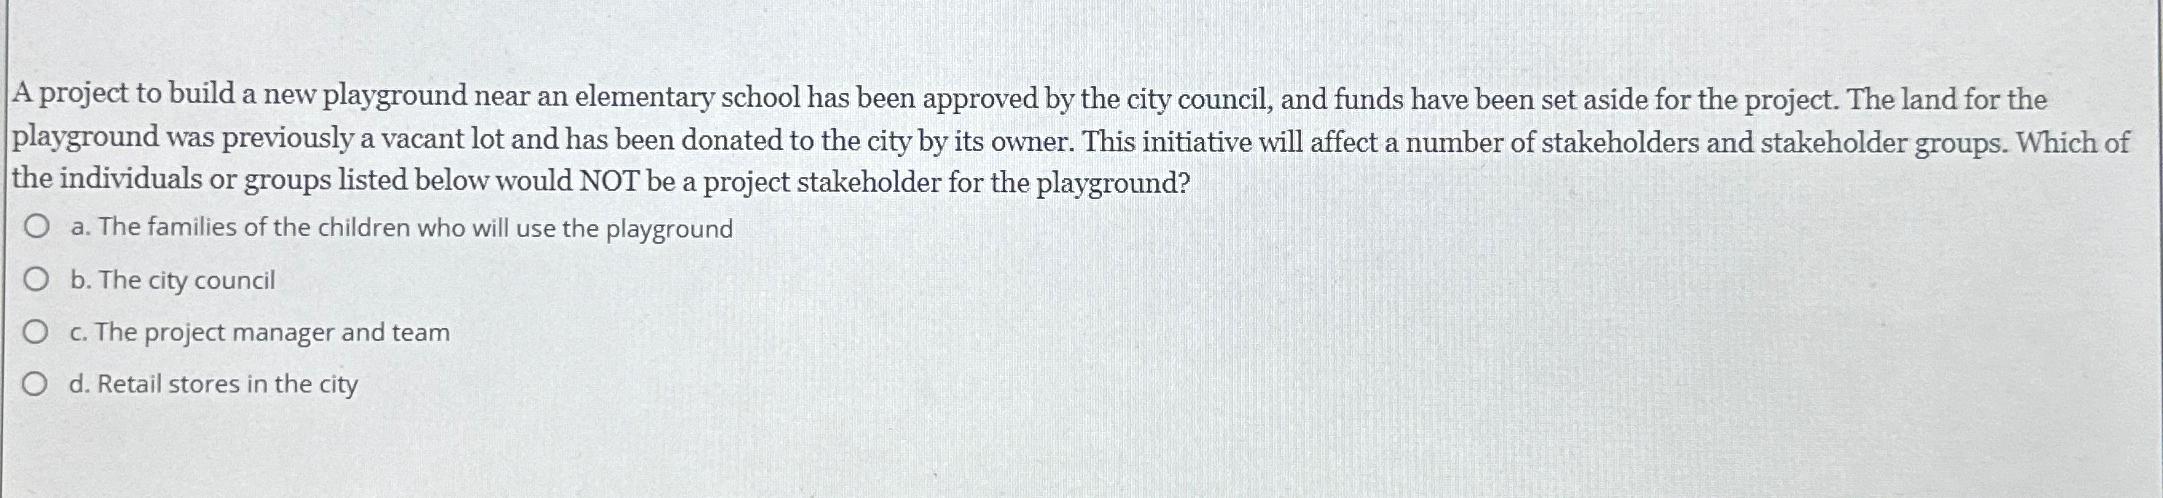 A project to build a new playground near an elementary school has been approved by the city council, and